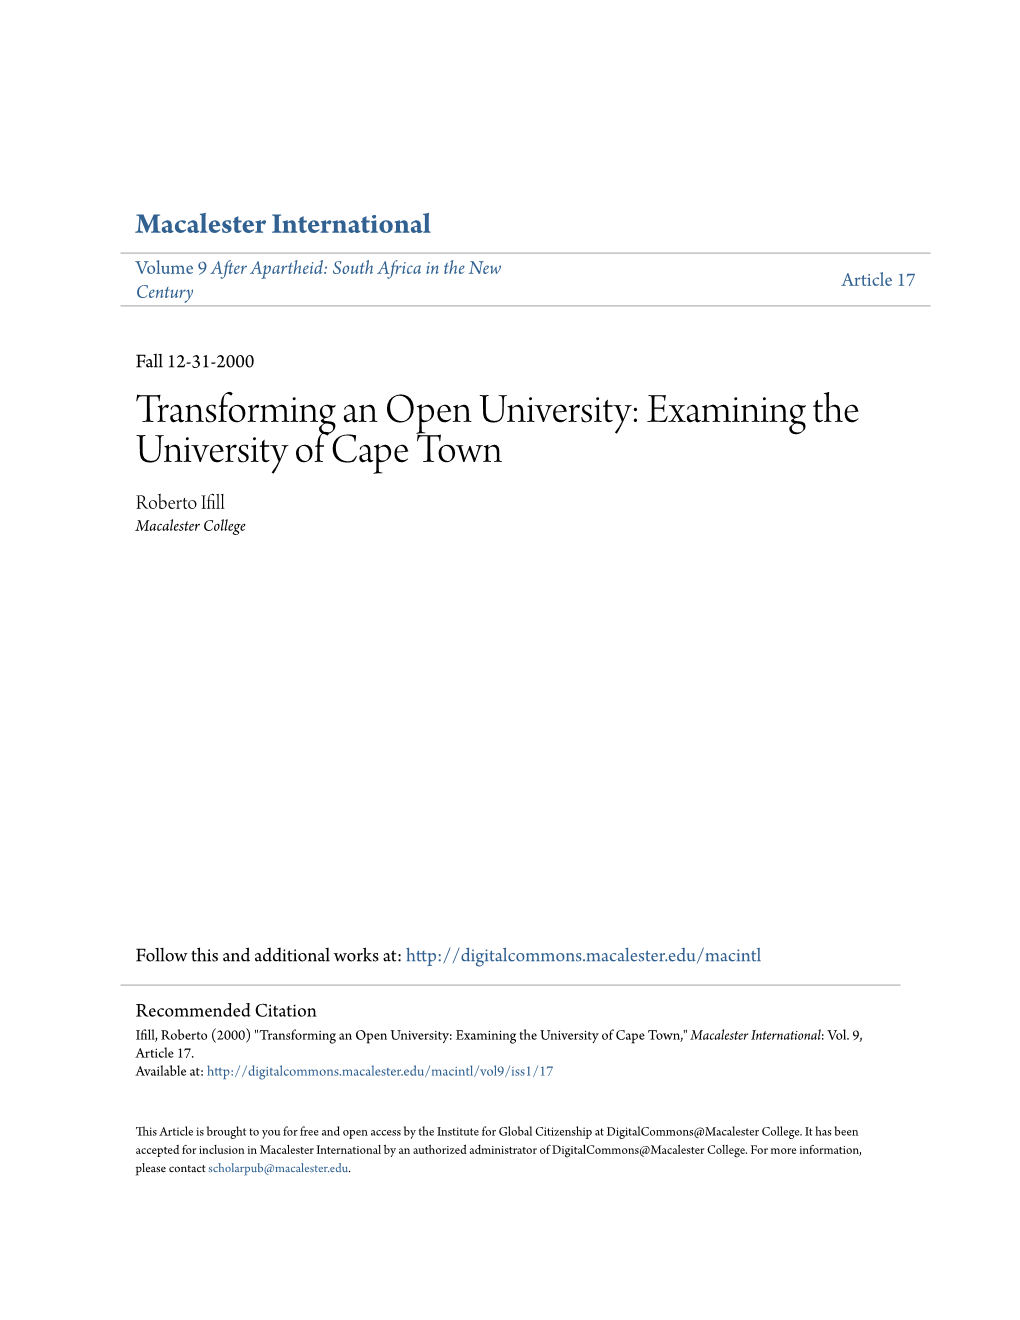 Examining the University of Cape Town Roberto Ifill Macalester College